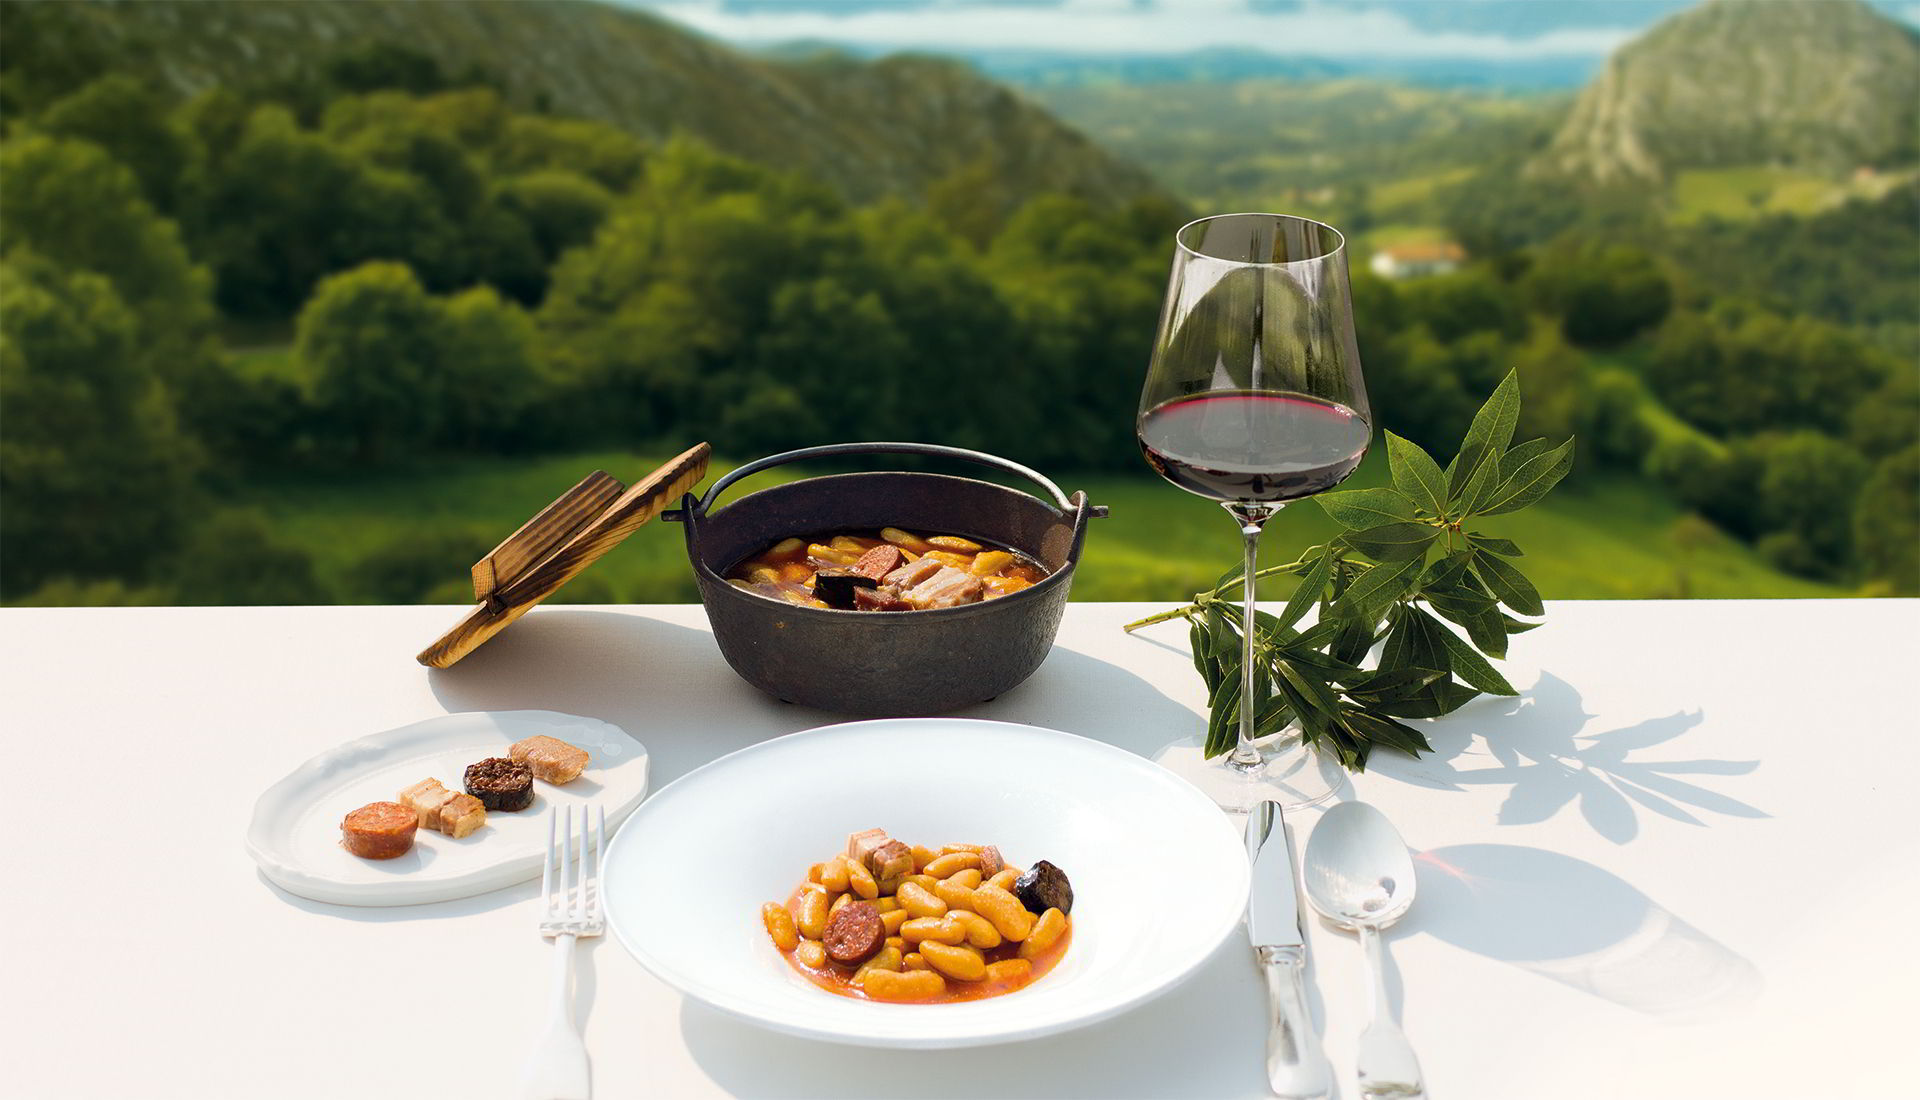 What to eat in Asturias